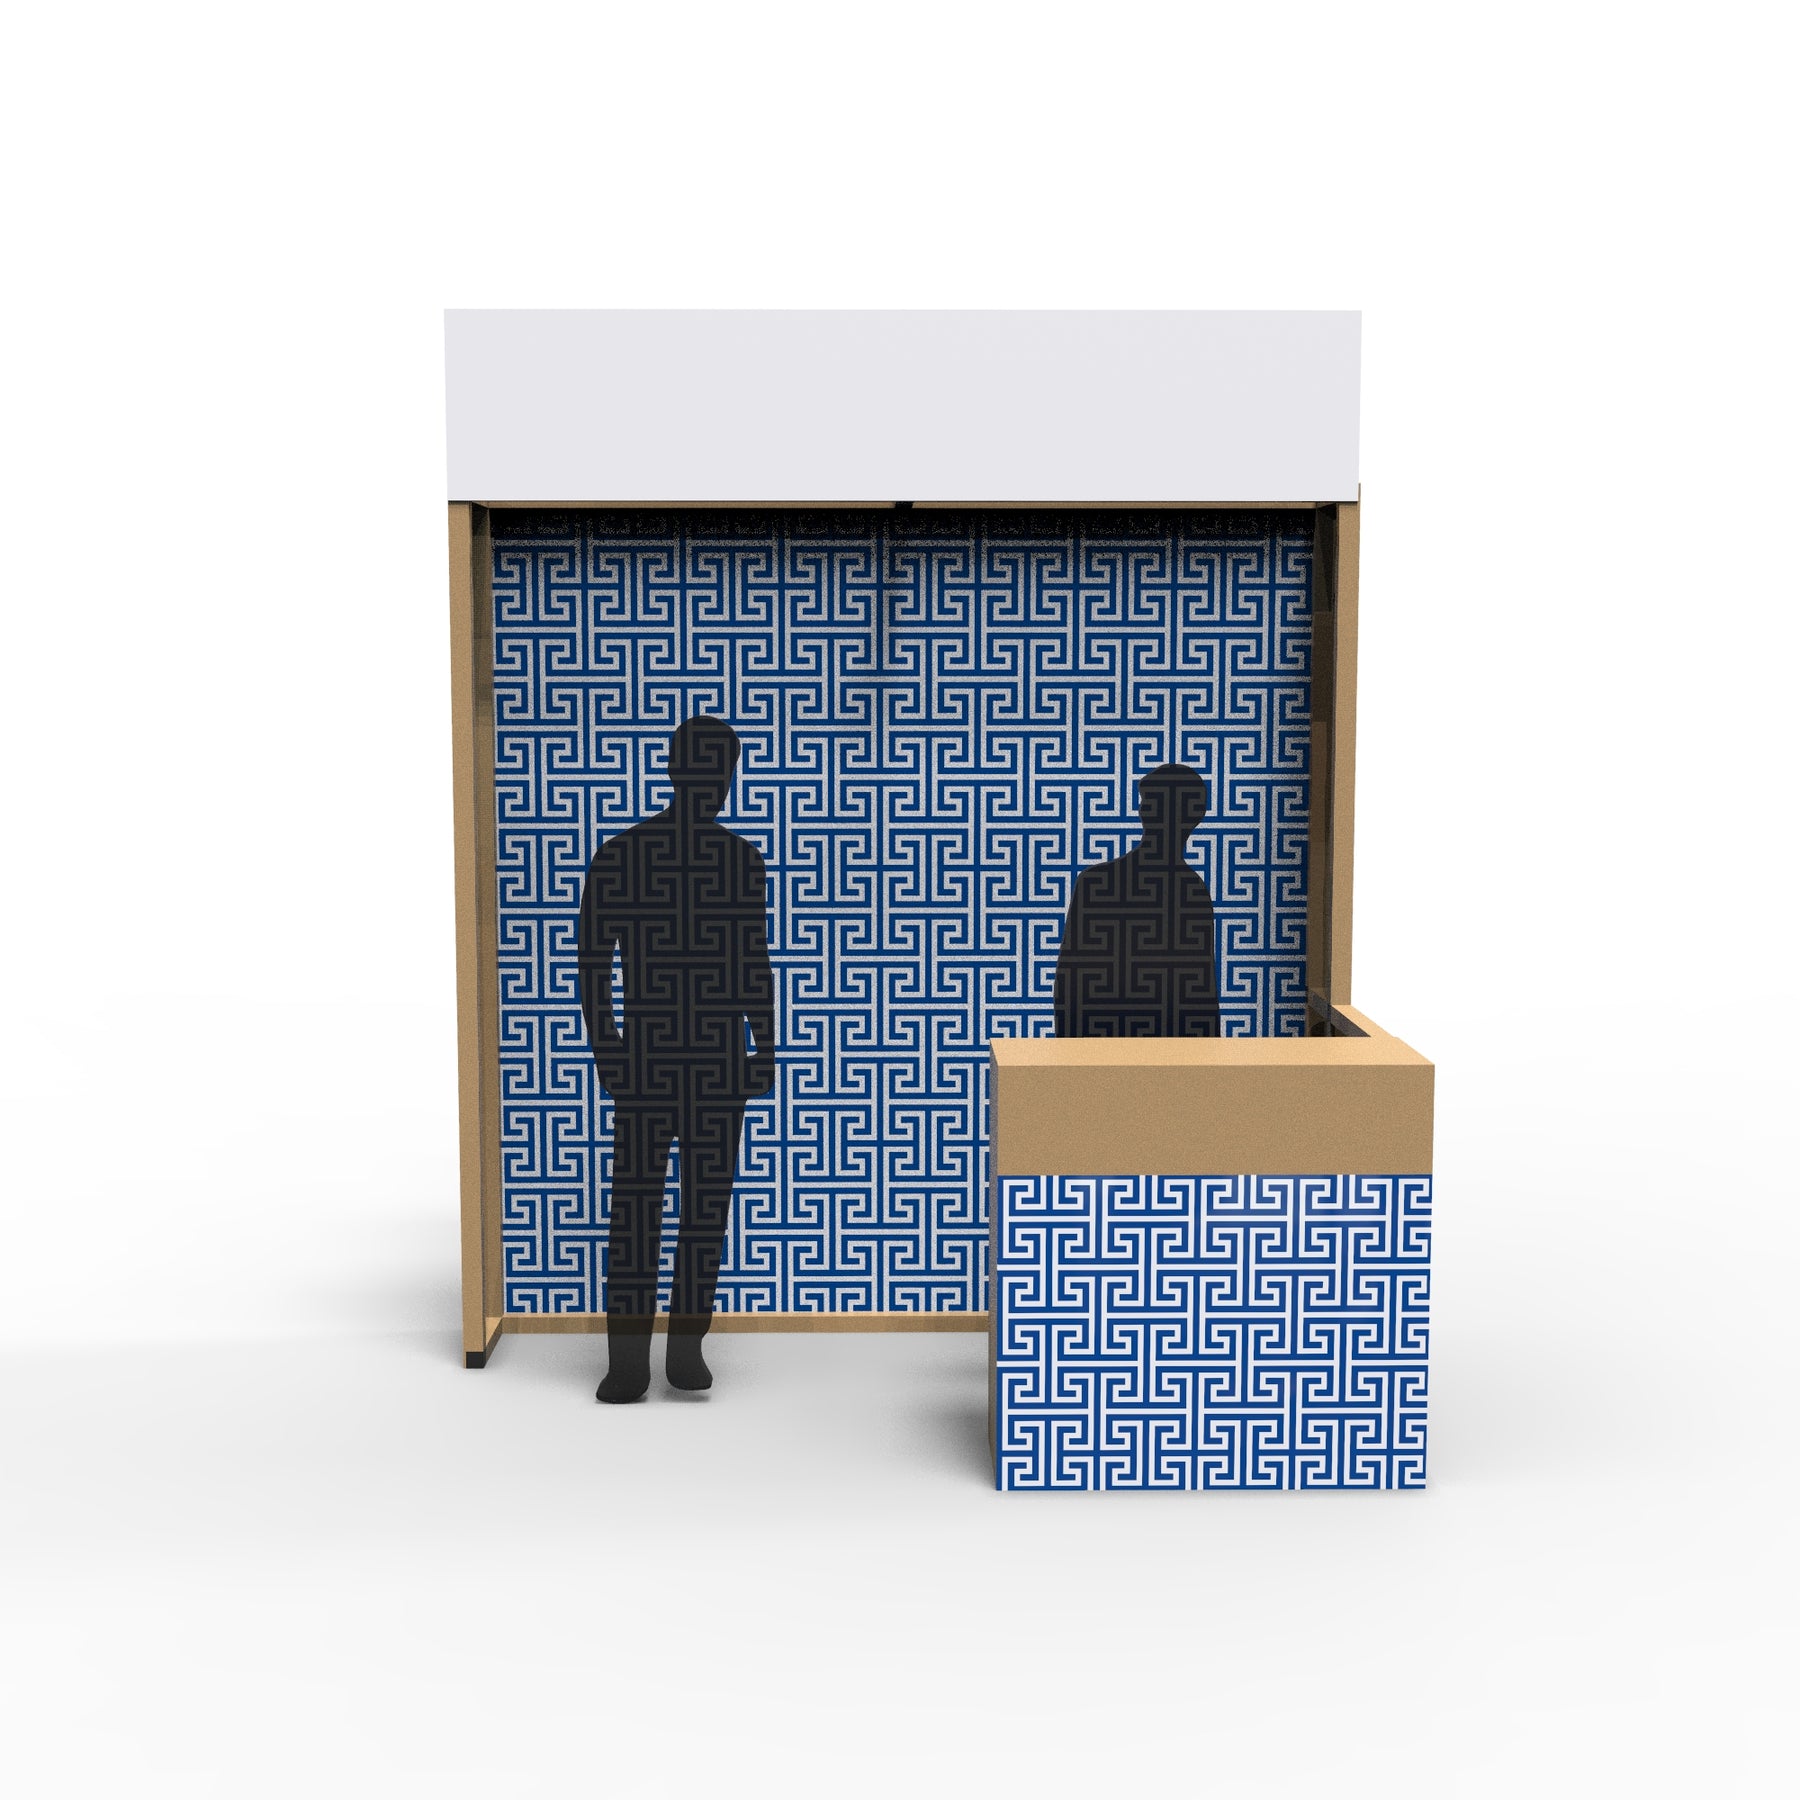 2.5m x 1.5m Exhibition Booth